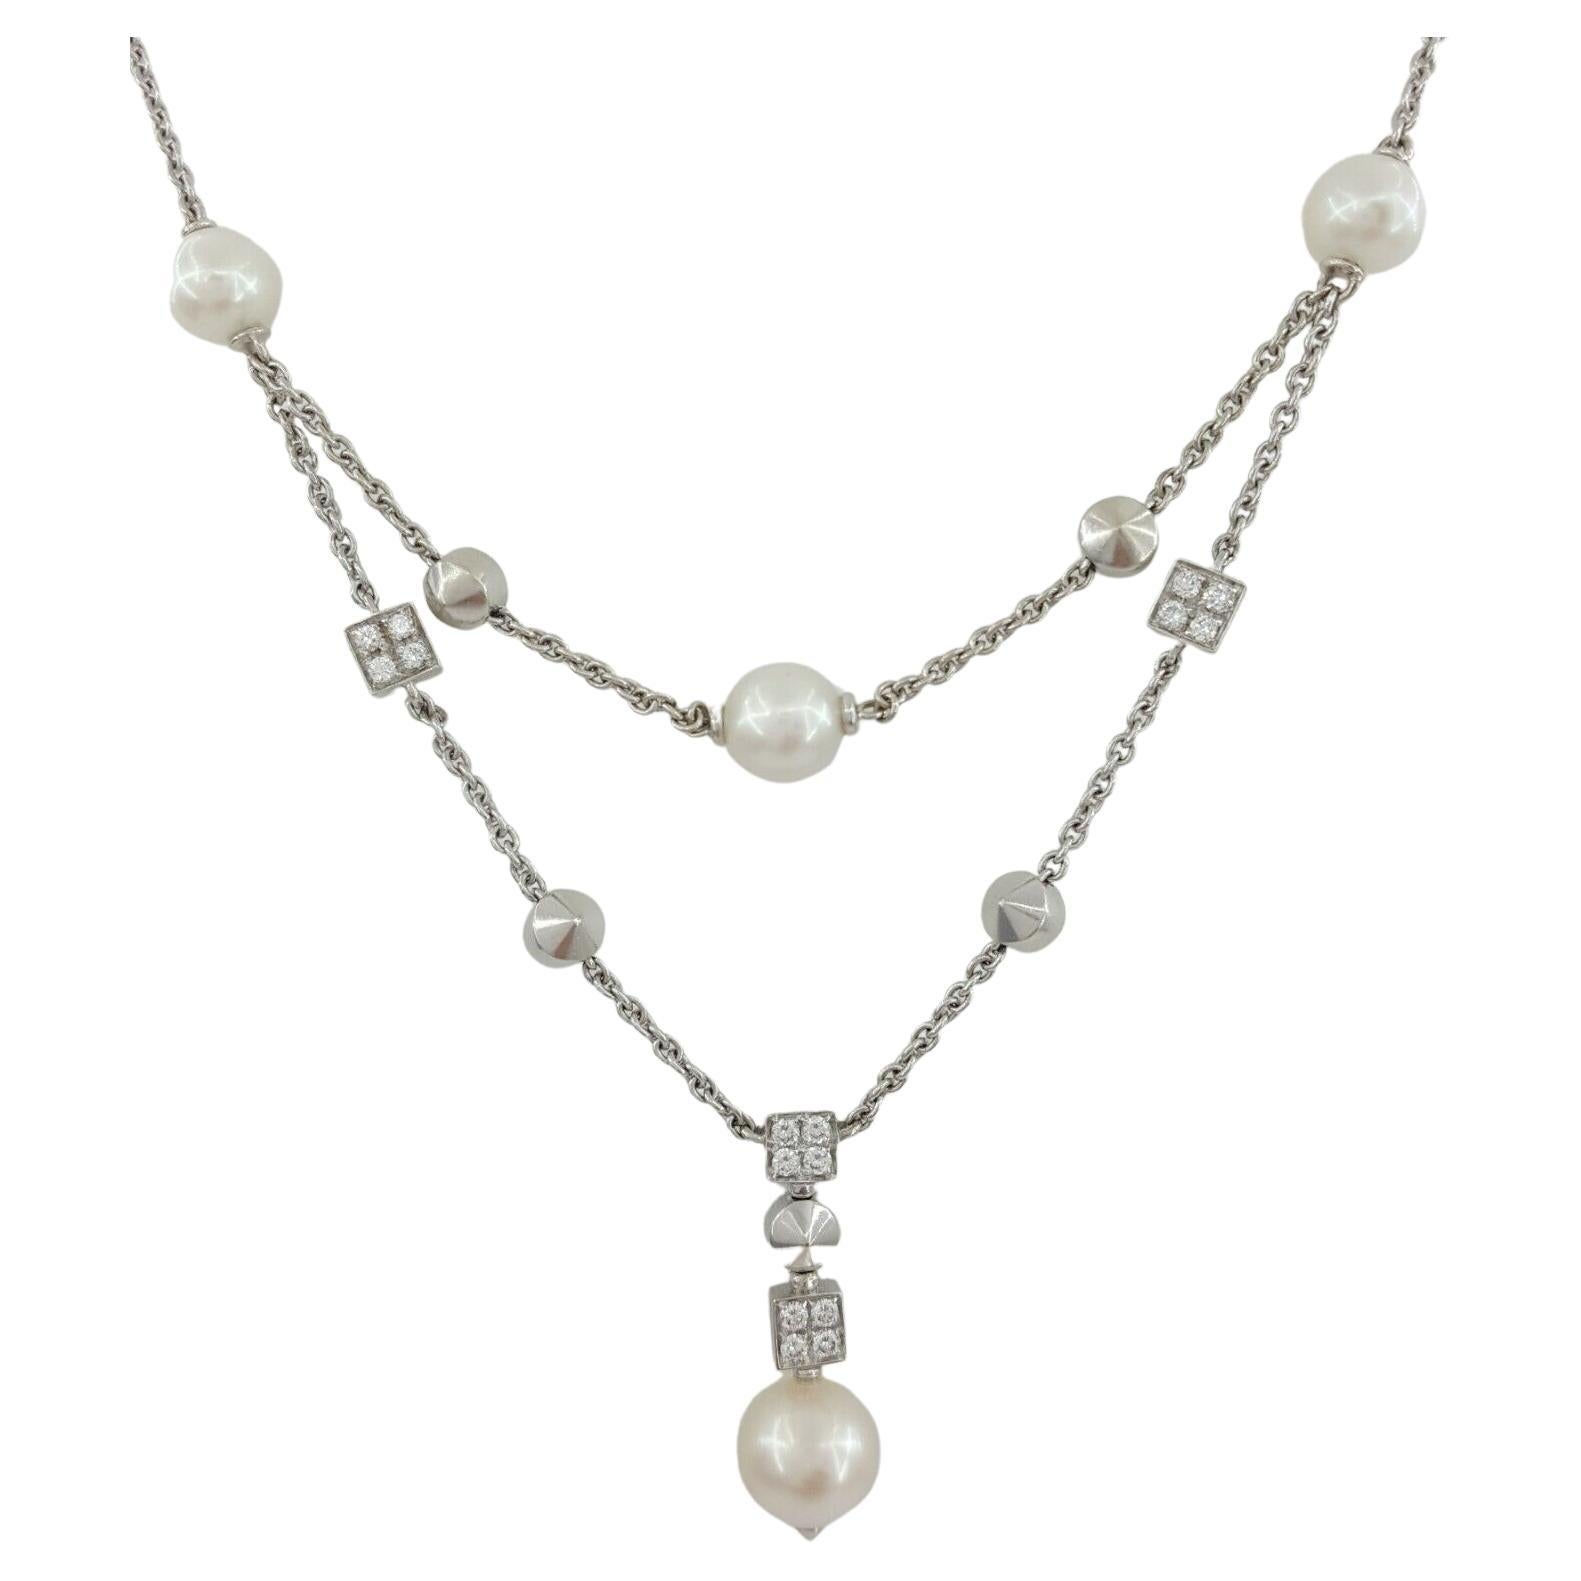 Bvlgari Lucia 18k White Gold 7-9mm Pearl & ~0.60 ct Round Diamonds Dangling Necklace.


The necklace and also contains 40 Round Brilliant cut Diamonds weighing approximately 0.60 ct total weight, F-G in color, VS1-VS2 in Clarity, measuring